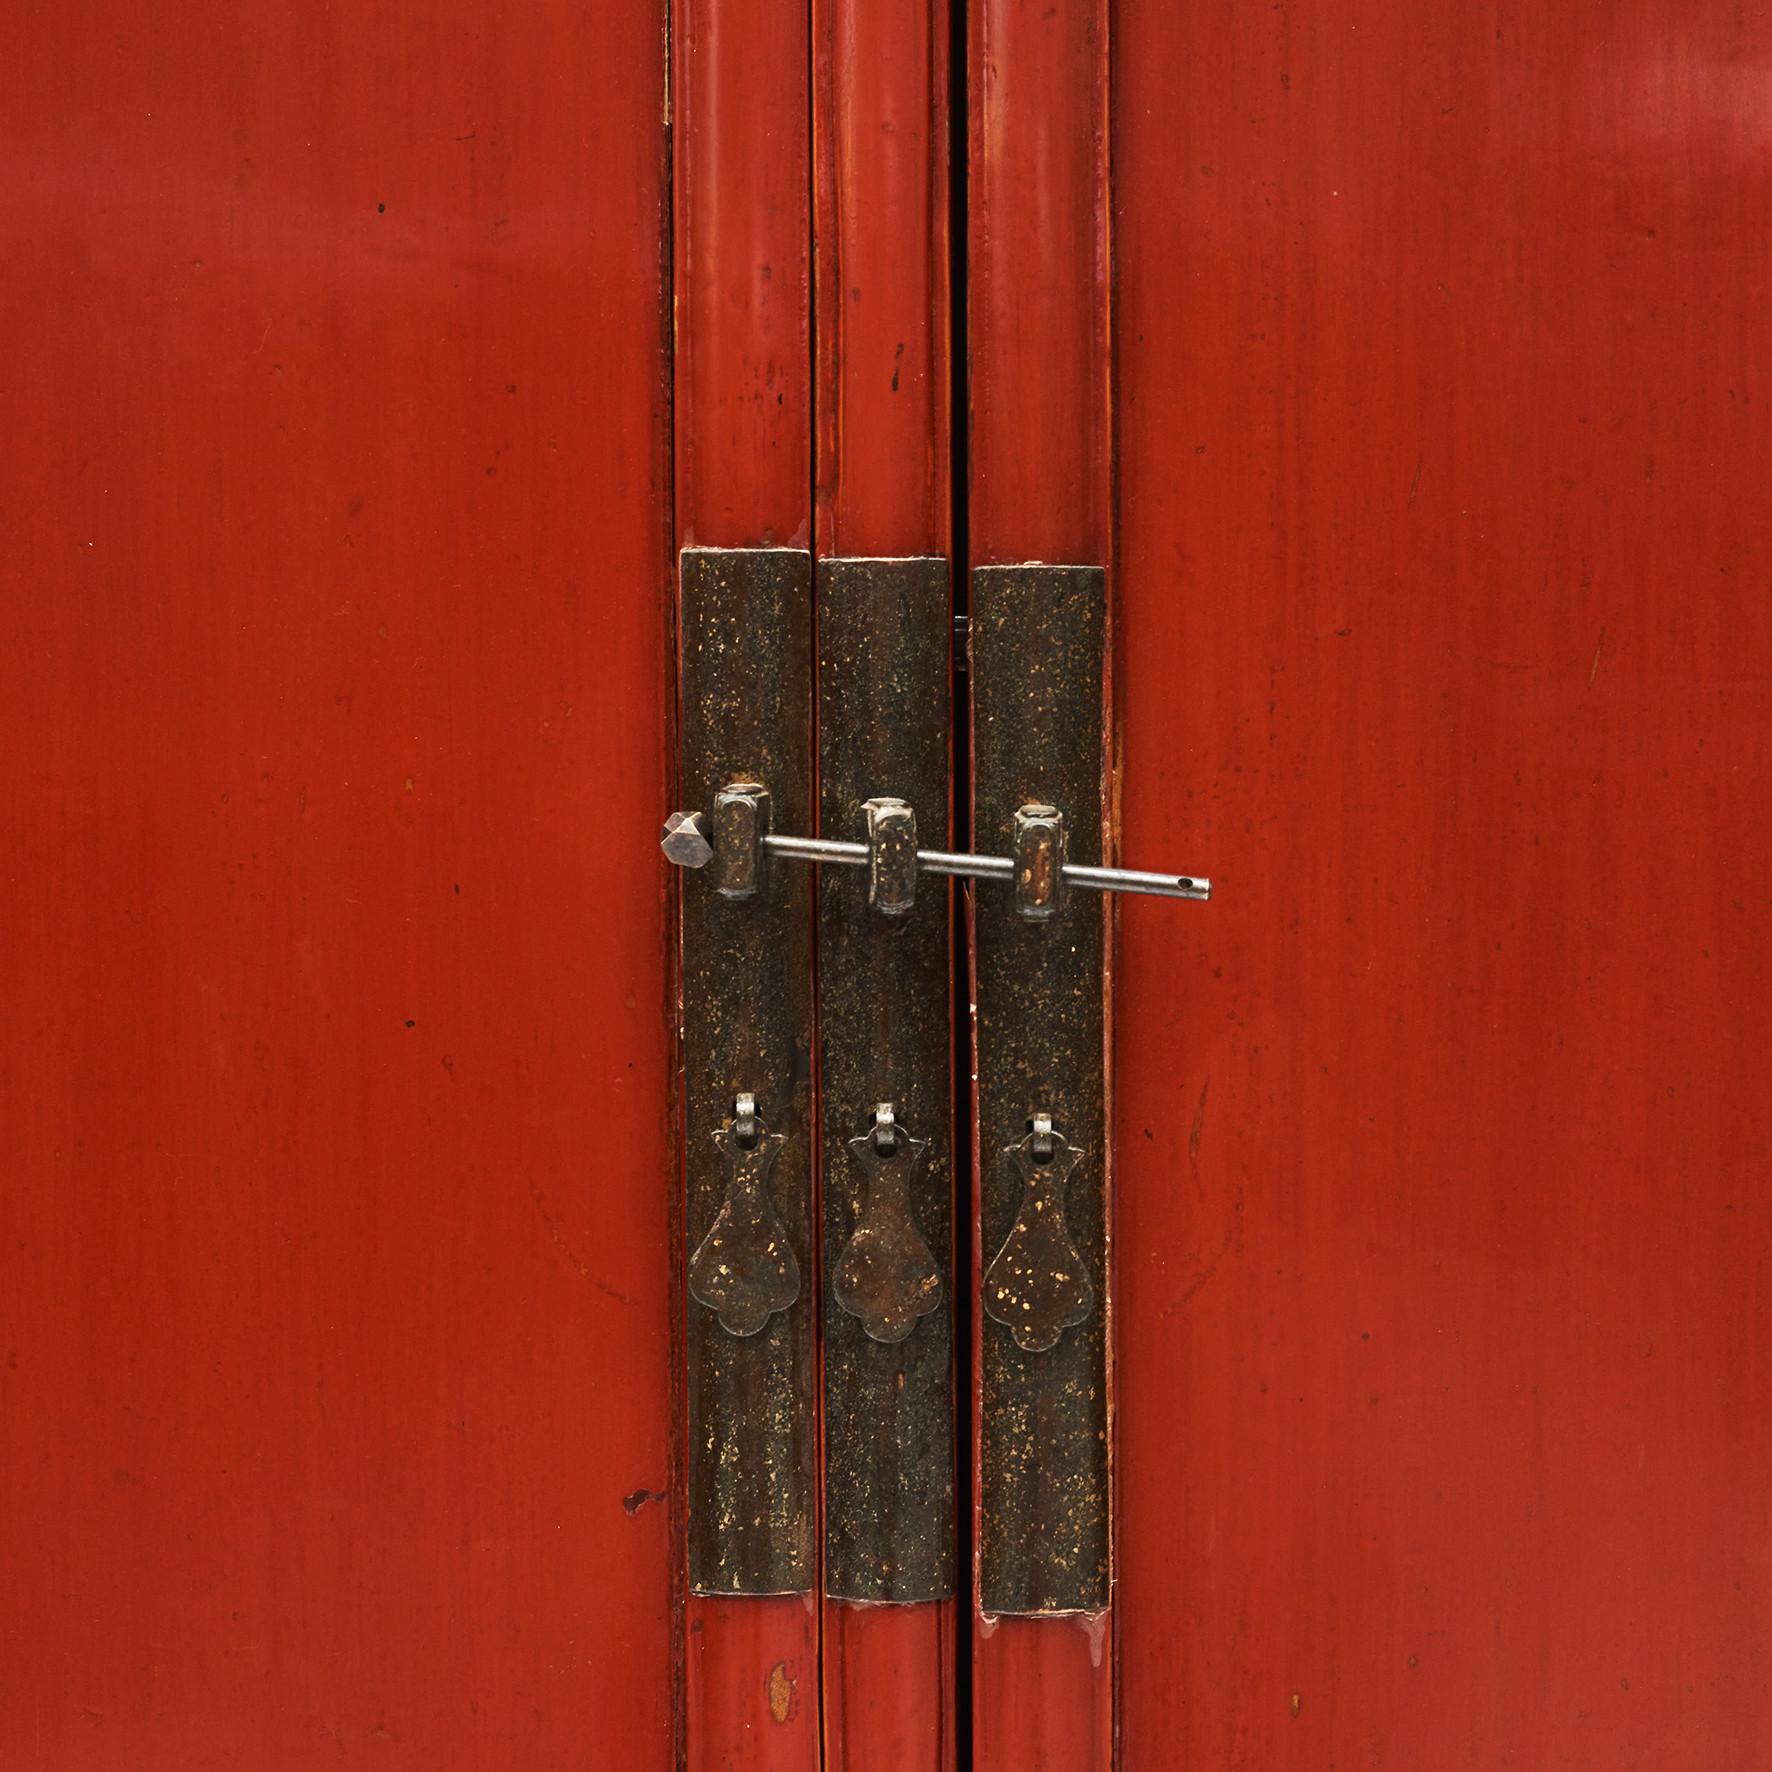 Mid-19th century Chinese tapered cabinet. Original red lacquer.
Pair of doors fitted with bronze lock opens to reveal a shelved interior, fitted with two drawers.
A cabinet in Ming style but with modern lines, almost resembling Art Deco